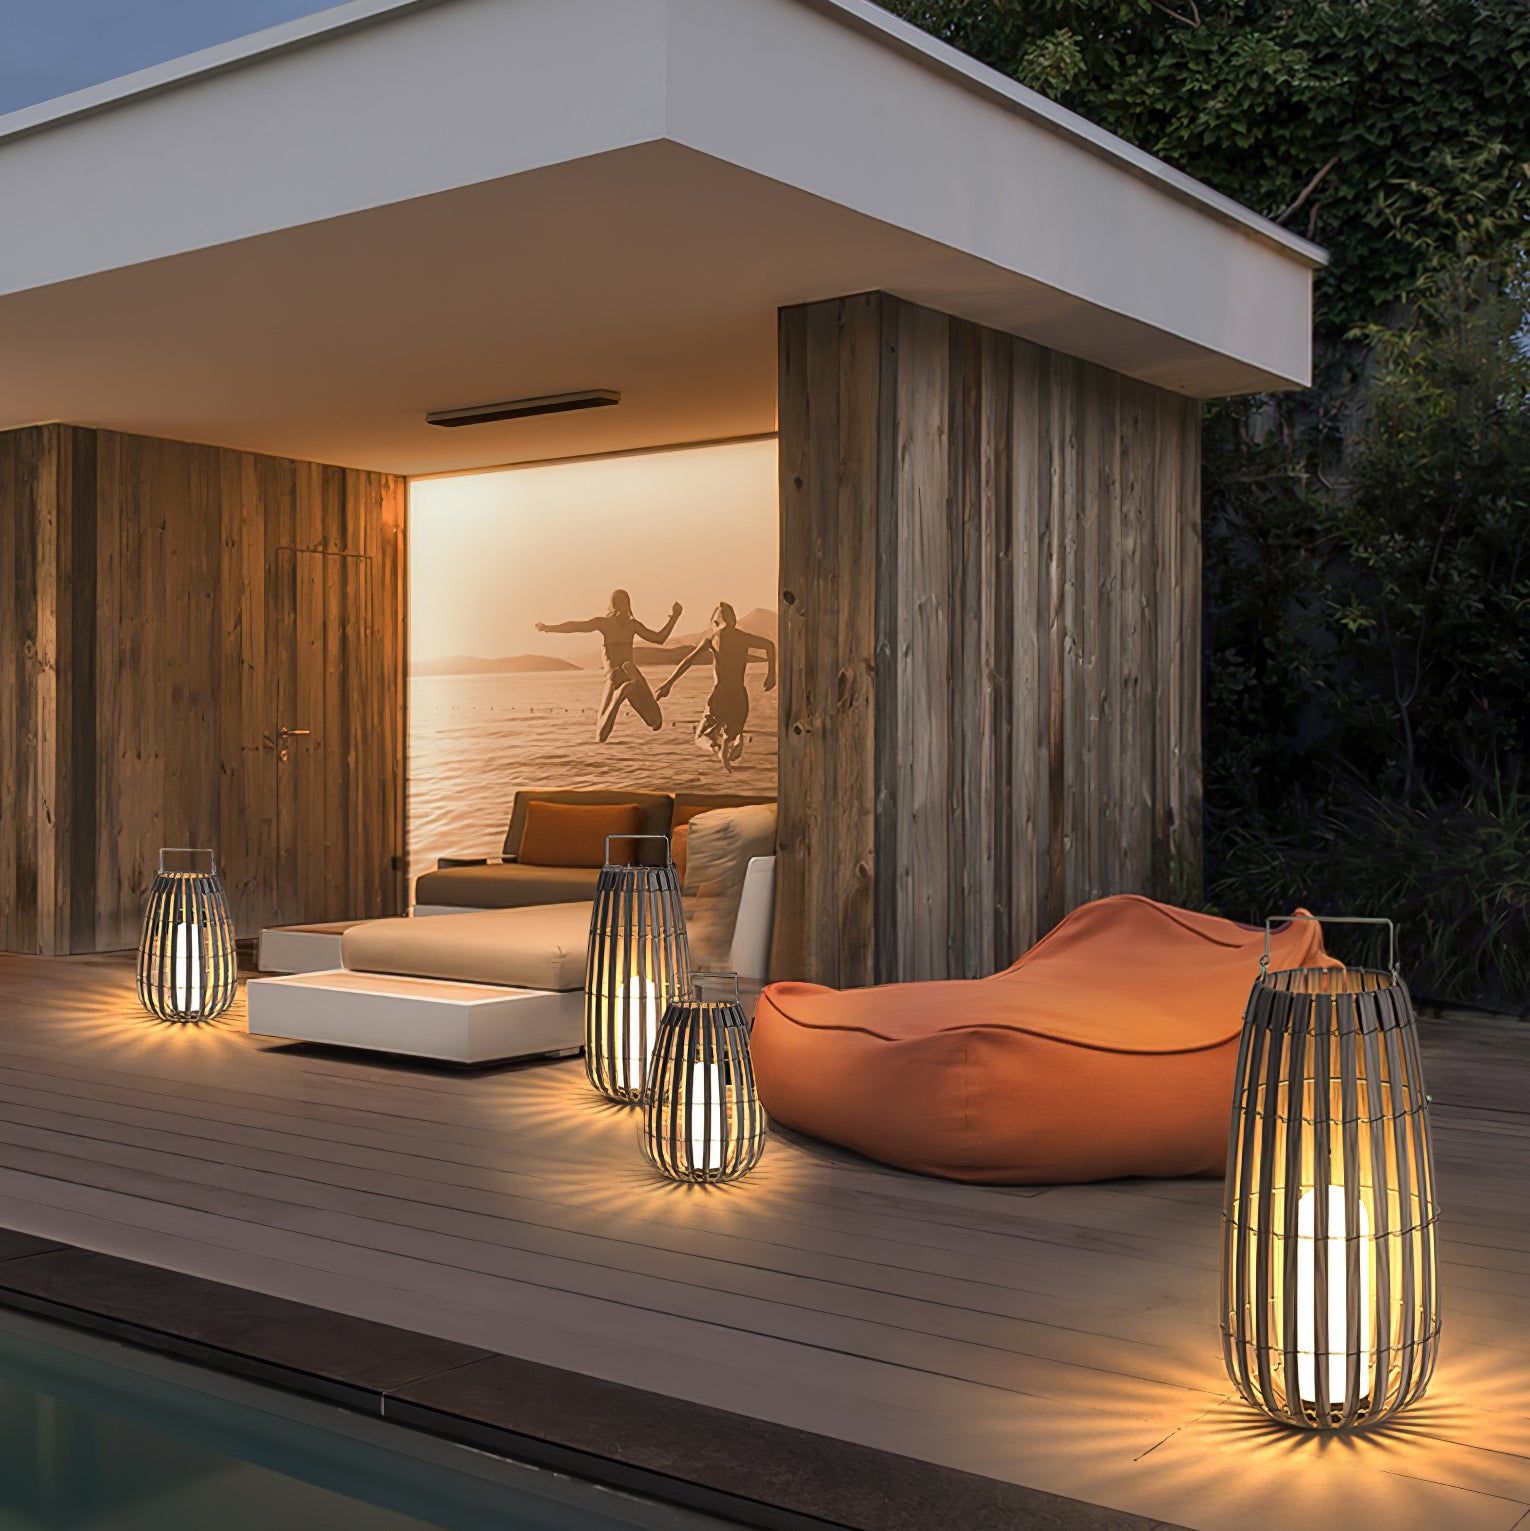 Outdoor Tropical Lanterns Perfect for Adding Ambiance to Your Outdoor Space